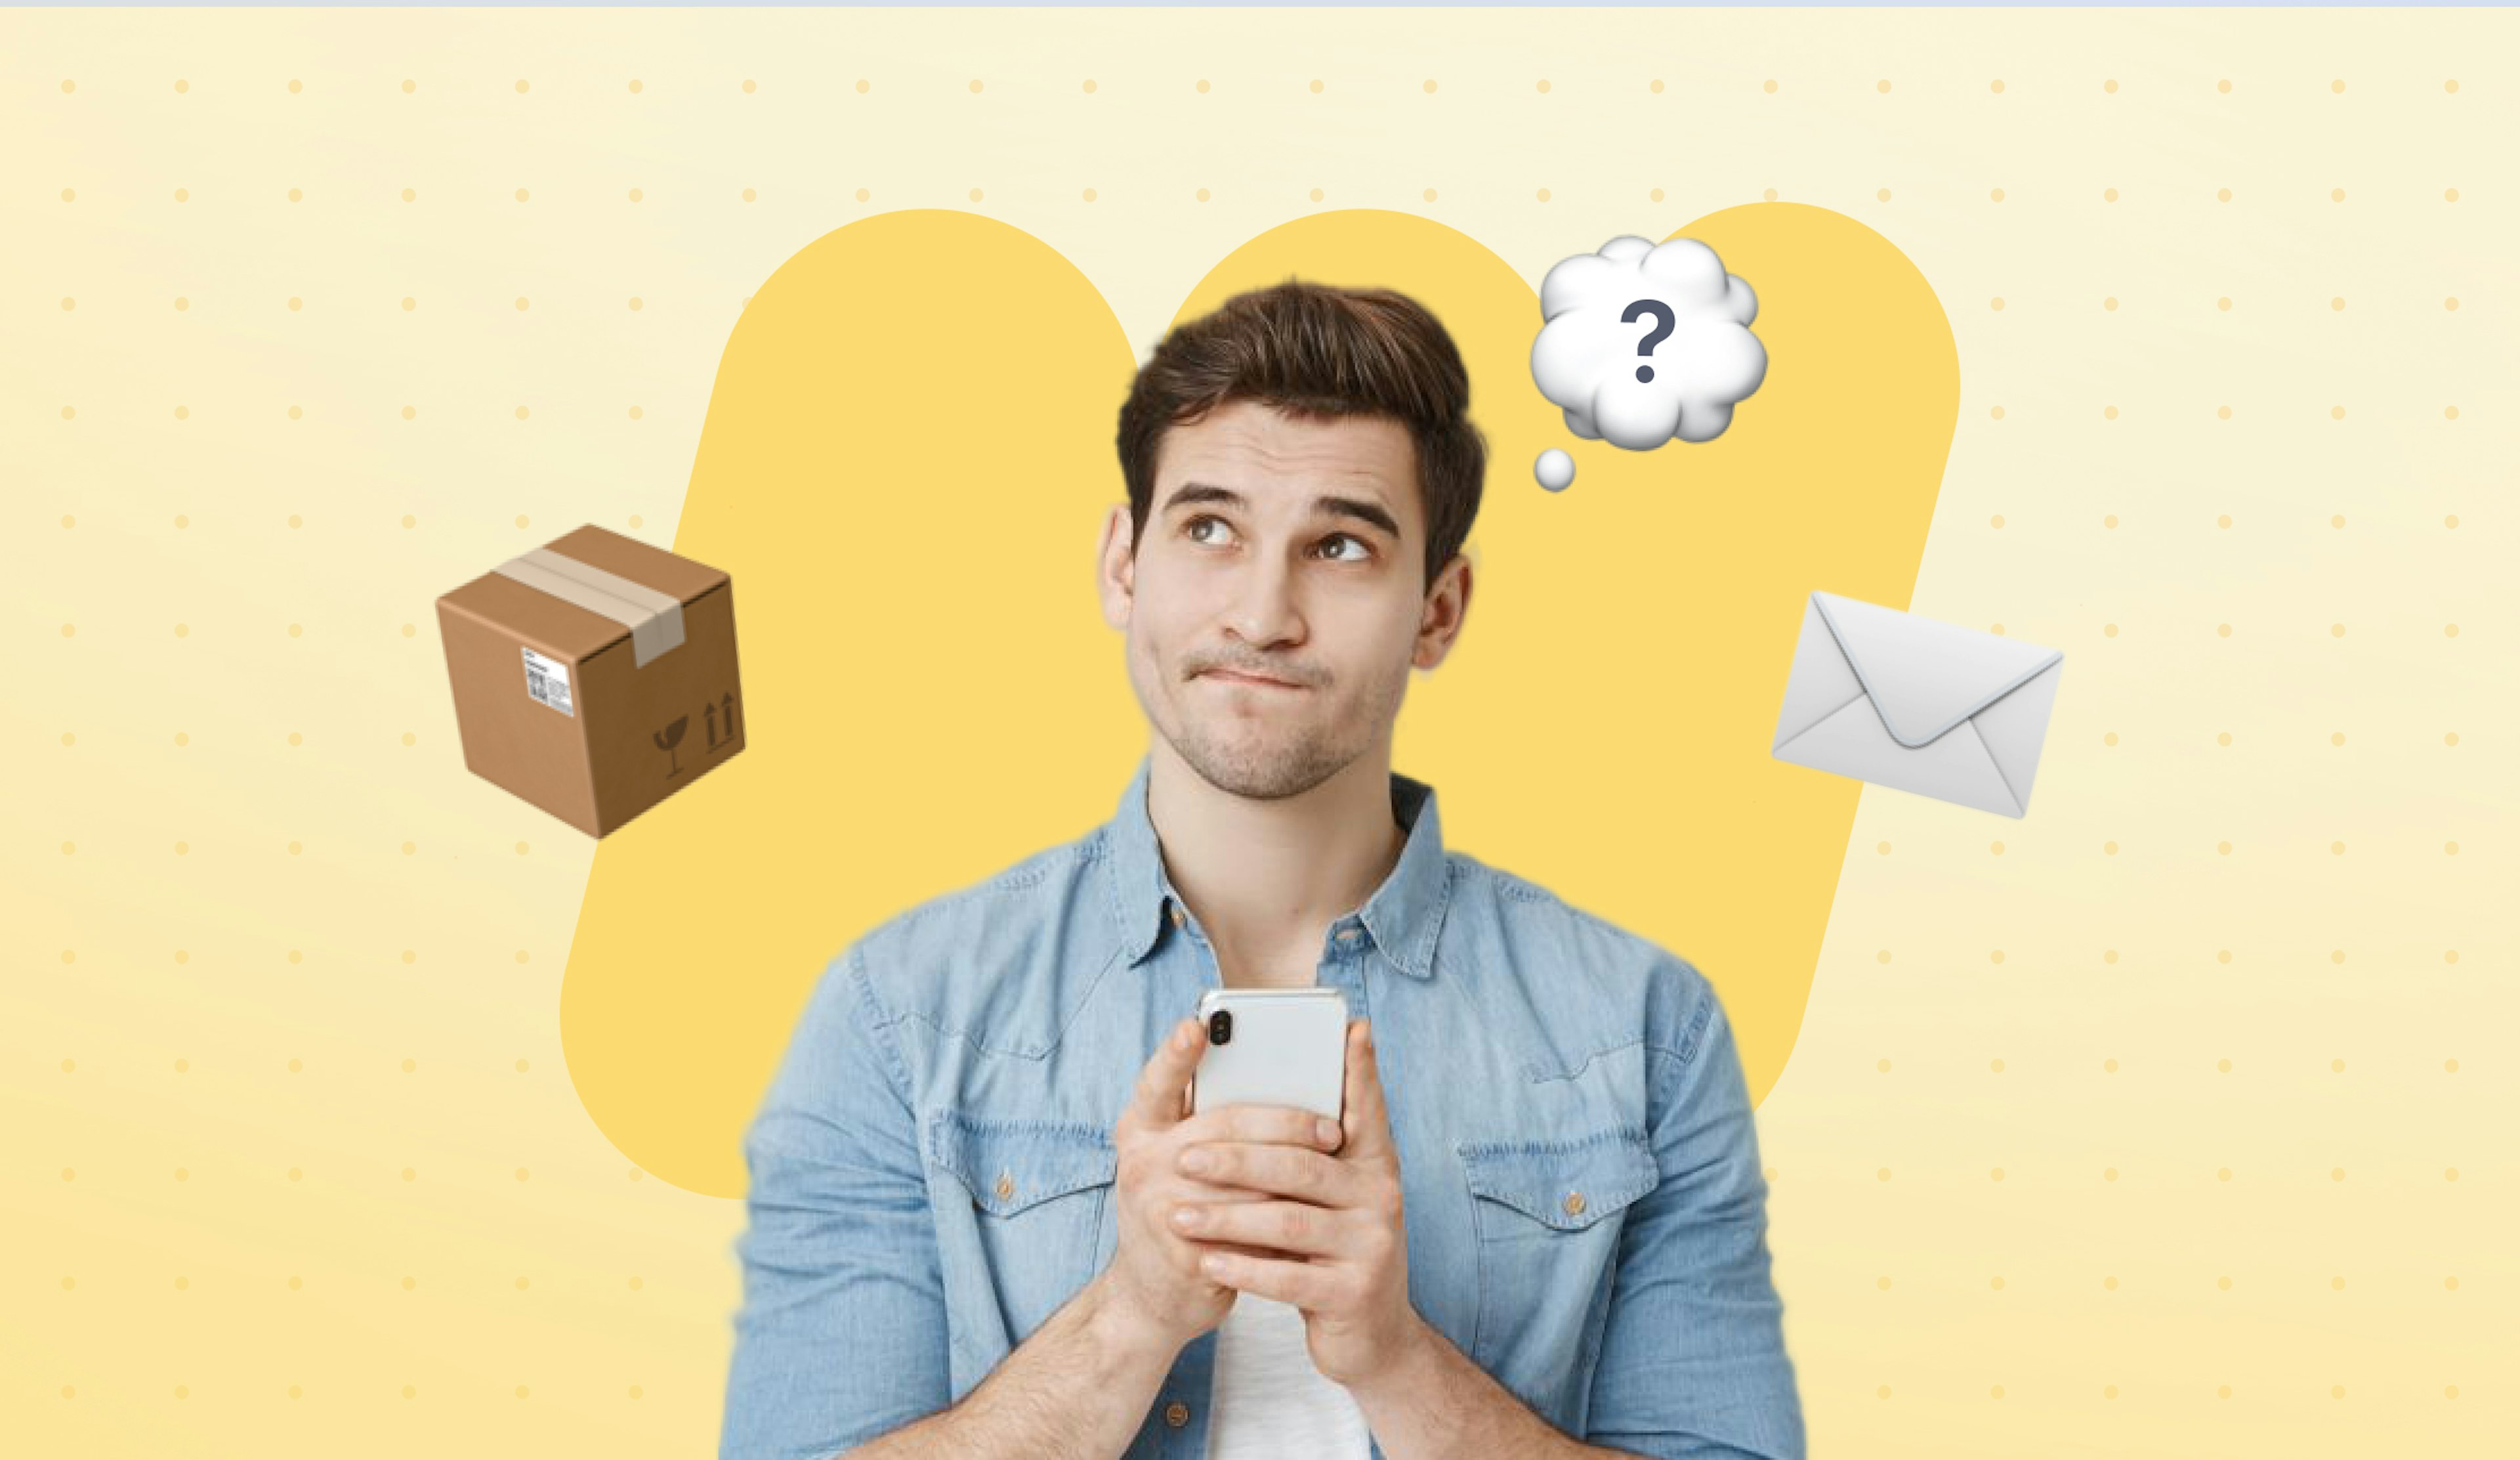 White man in a blue shirt holding a mobile phone and thinking with a thought bubble above his head and a box and letter in the background.